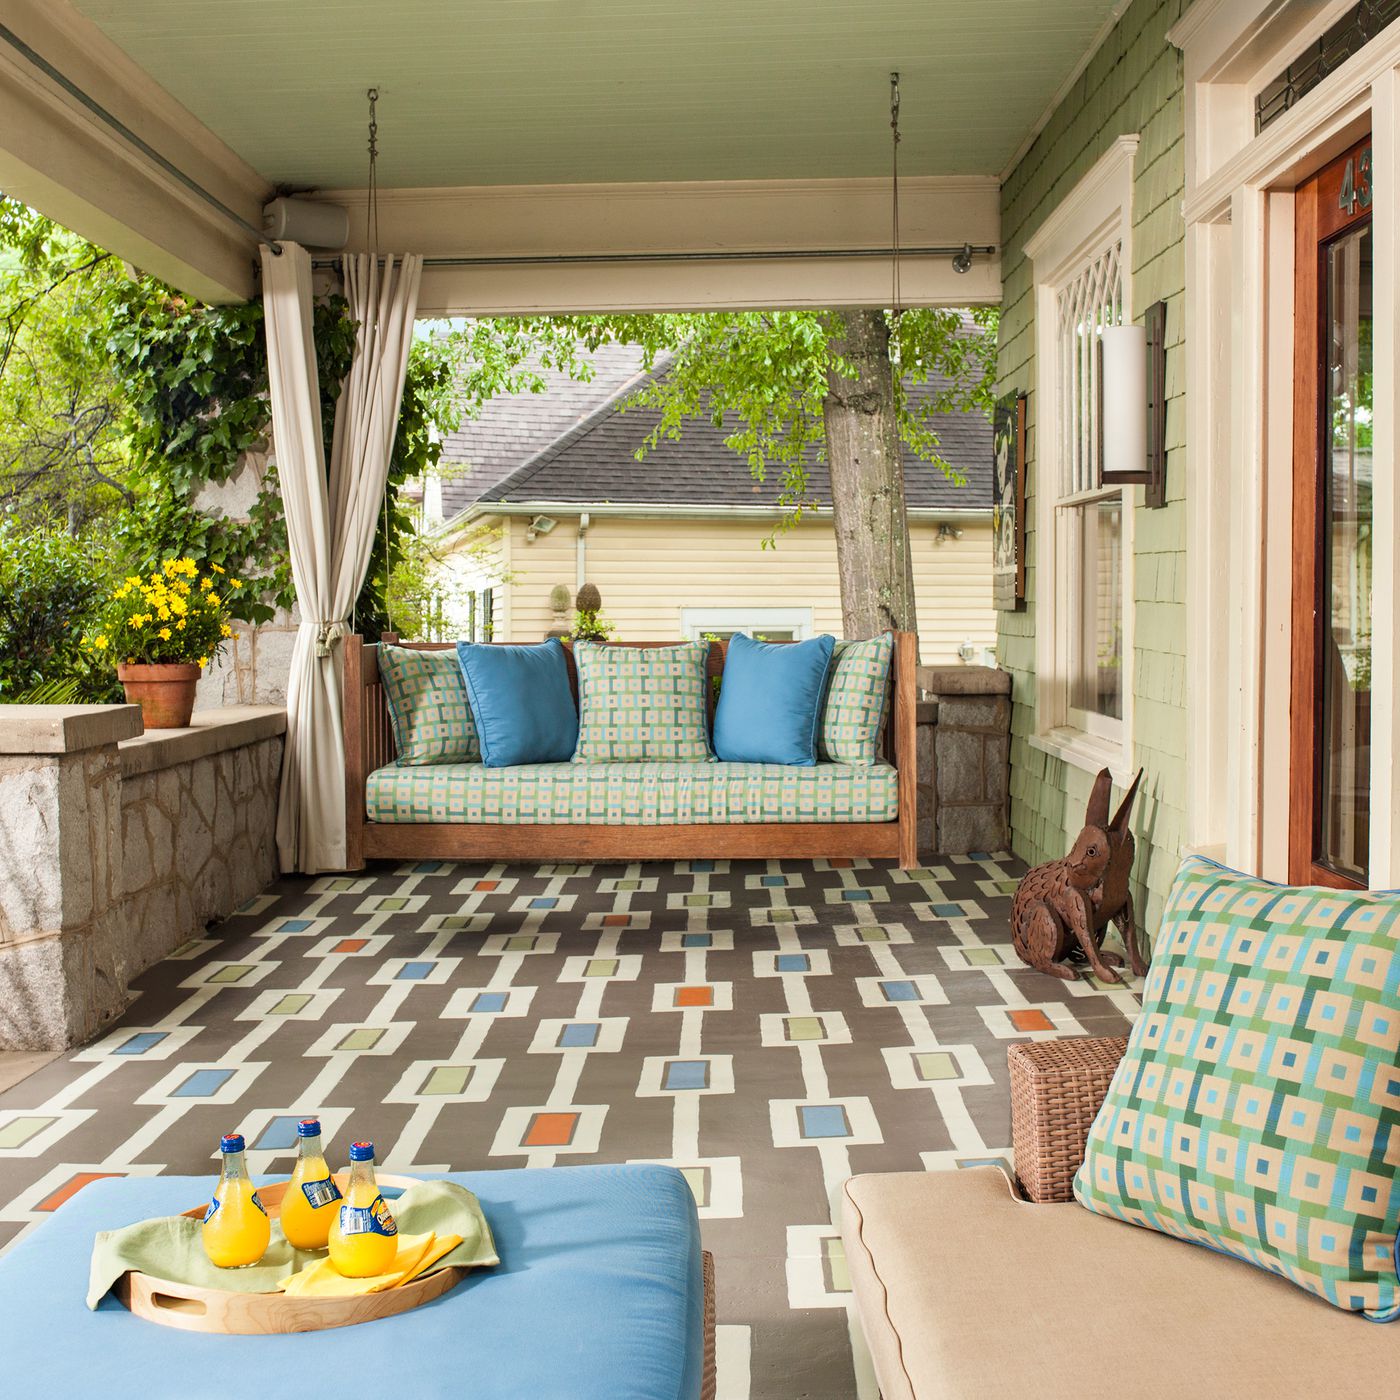 5 Ways To Paint A Porch Floor This Old House